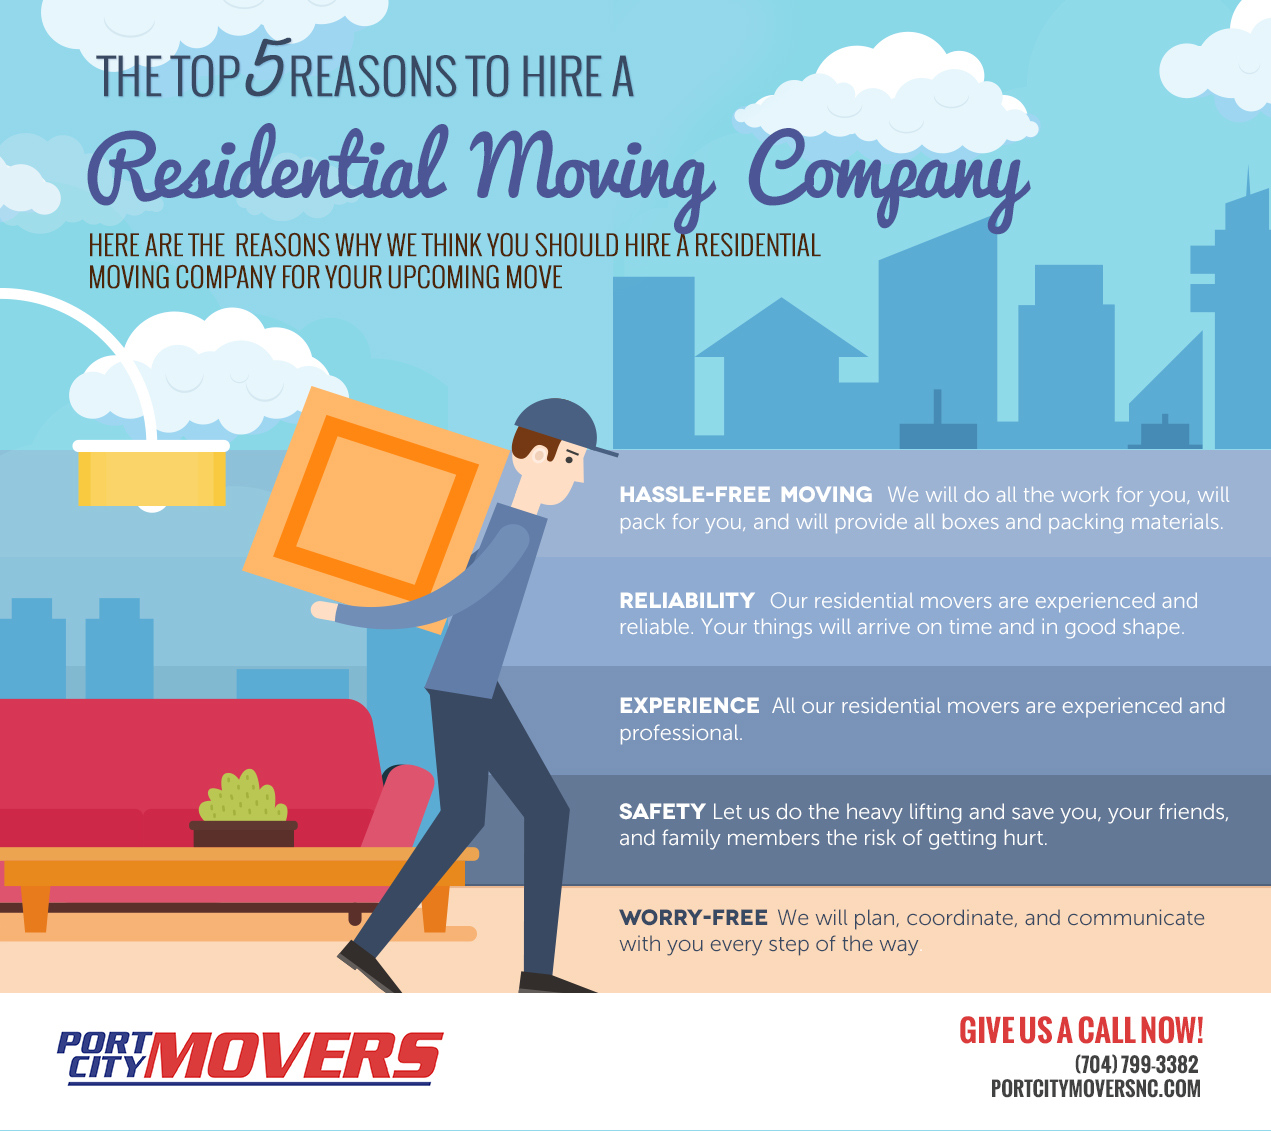 Not Sure if You Want to Hire Residential Movers? Here are Five Reasons Why You Should. [infographic]